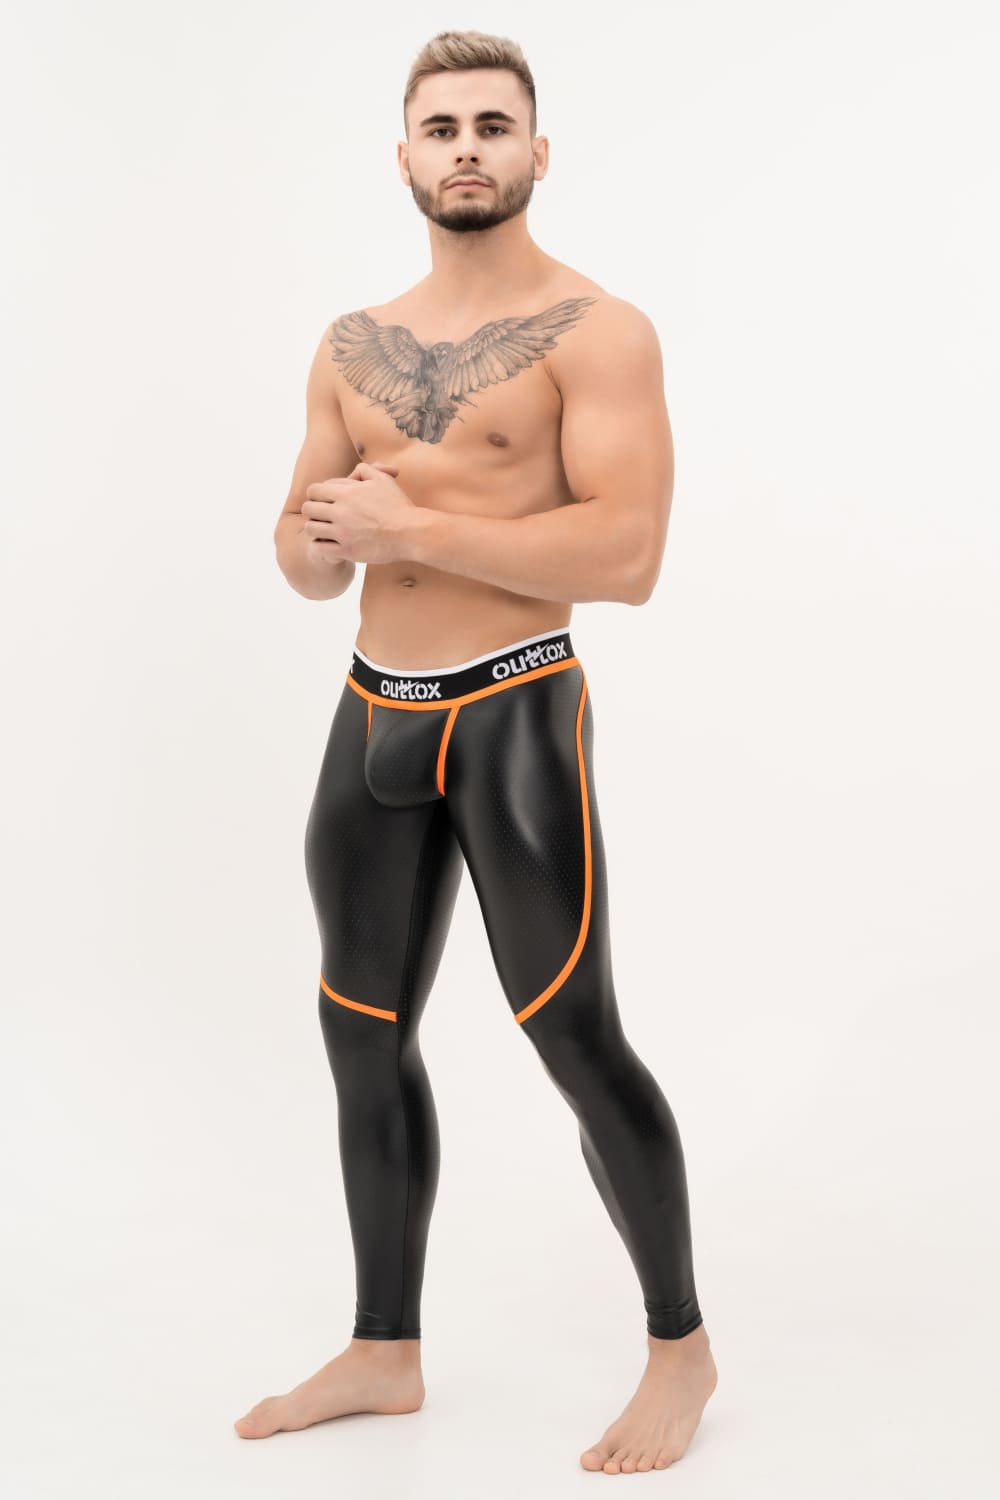 Outtox. Zip-Rear Leggings with Snap Codpiece. Black+Orange